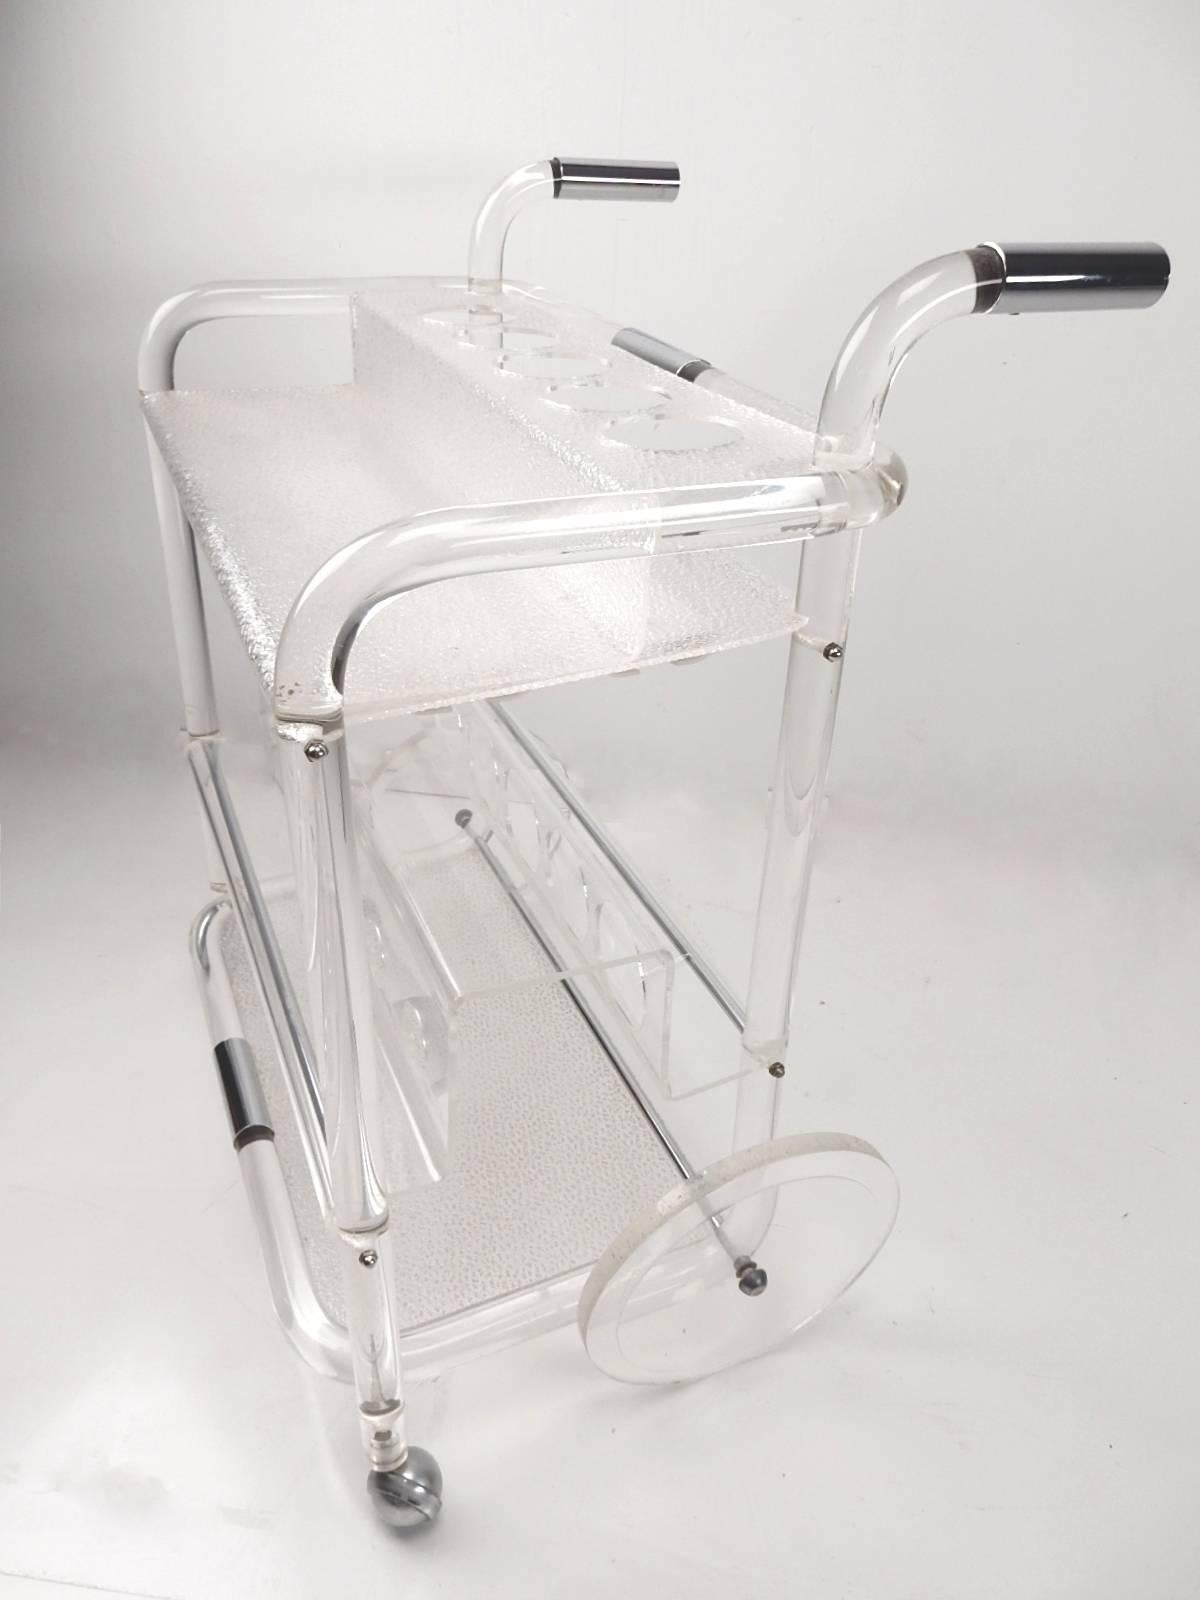 Unique 1960s rolling bar cart with a 1-1/2 inch solid Lucite rod capped with chrome steel handles.
Centre shelf holds six bottles. Bottom and top shelves have an ice finish with lots of room for glasses and four more decanters on top.
Large Lucite